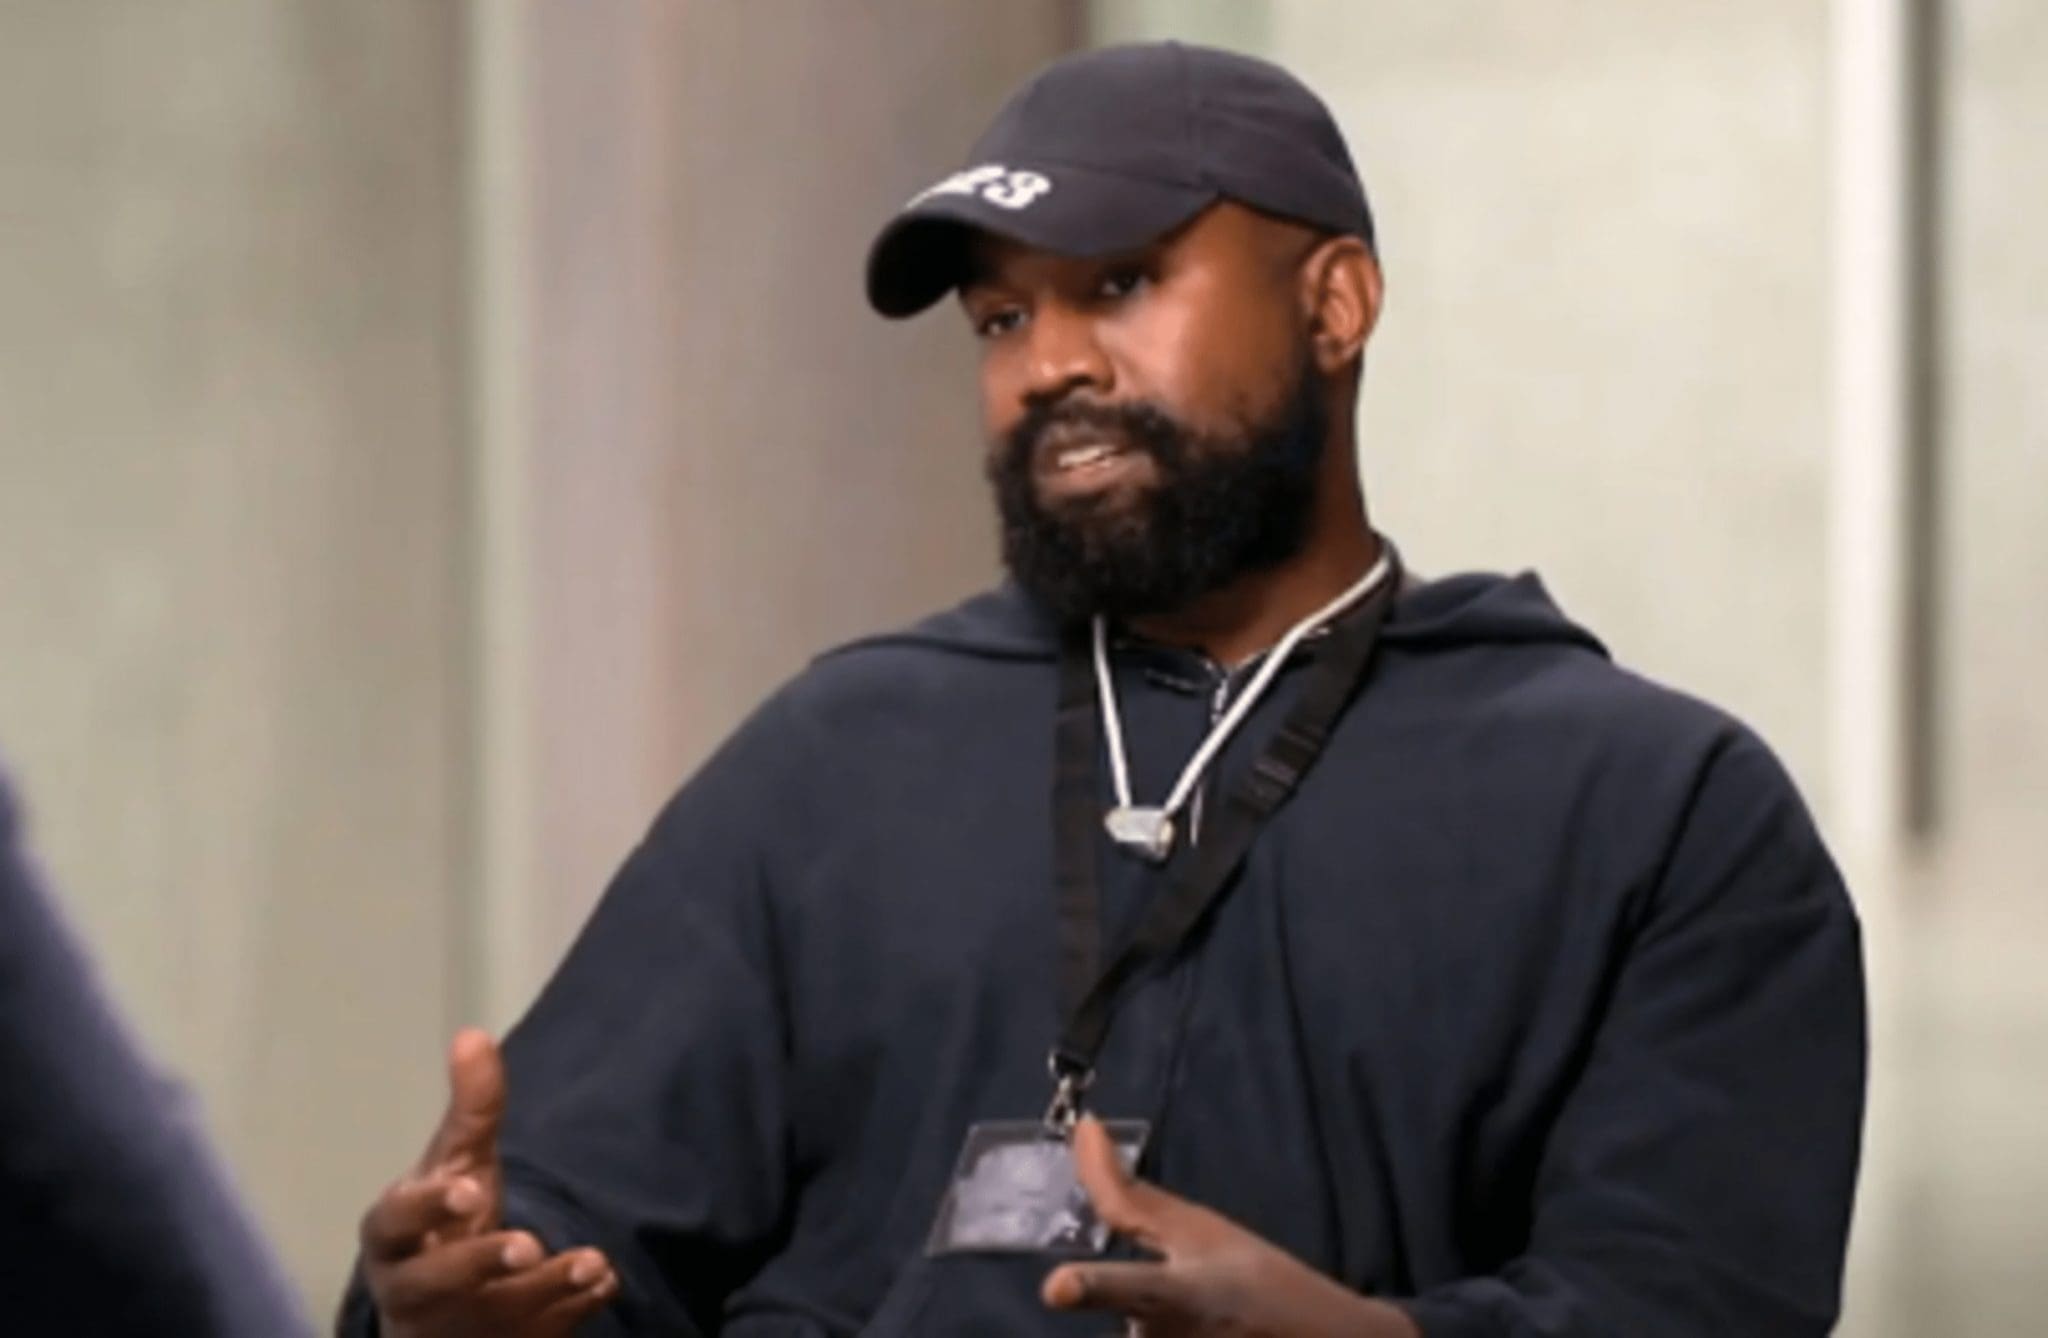 Kanye West has claimed that his Instagram rants serve as a spiritual purification ritual.